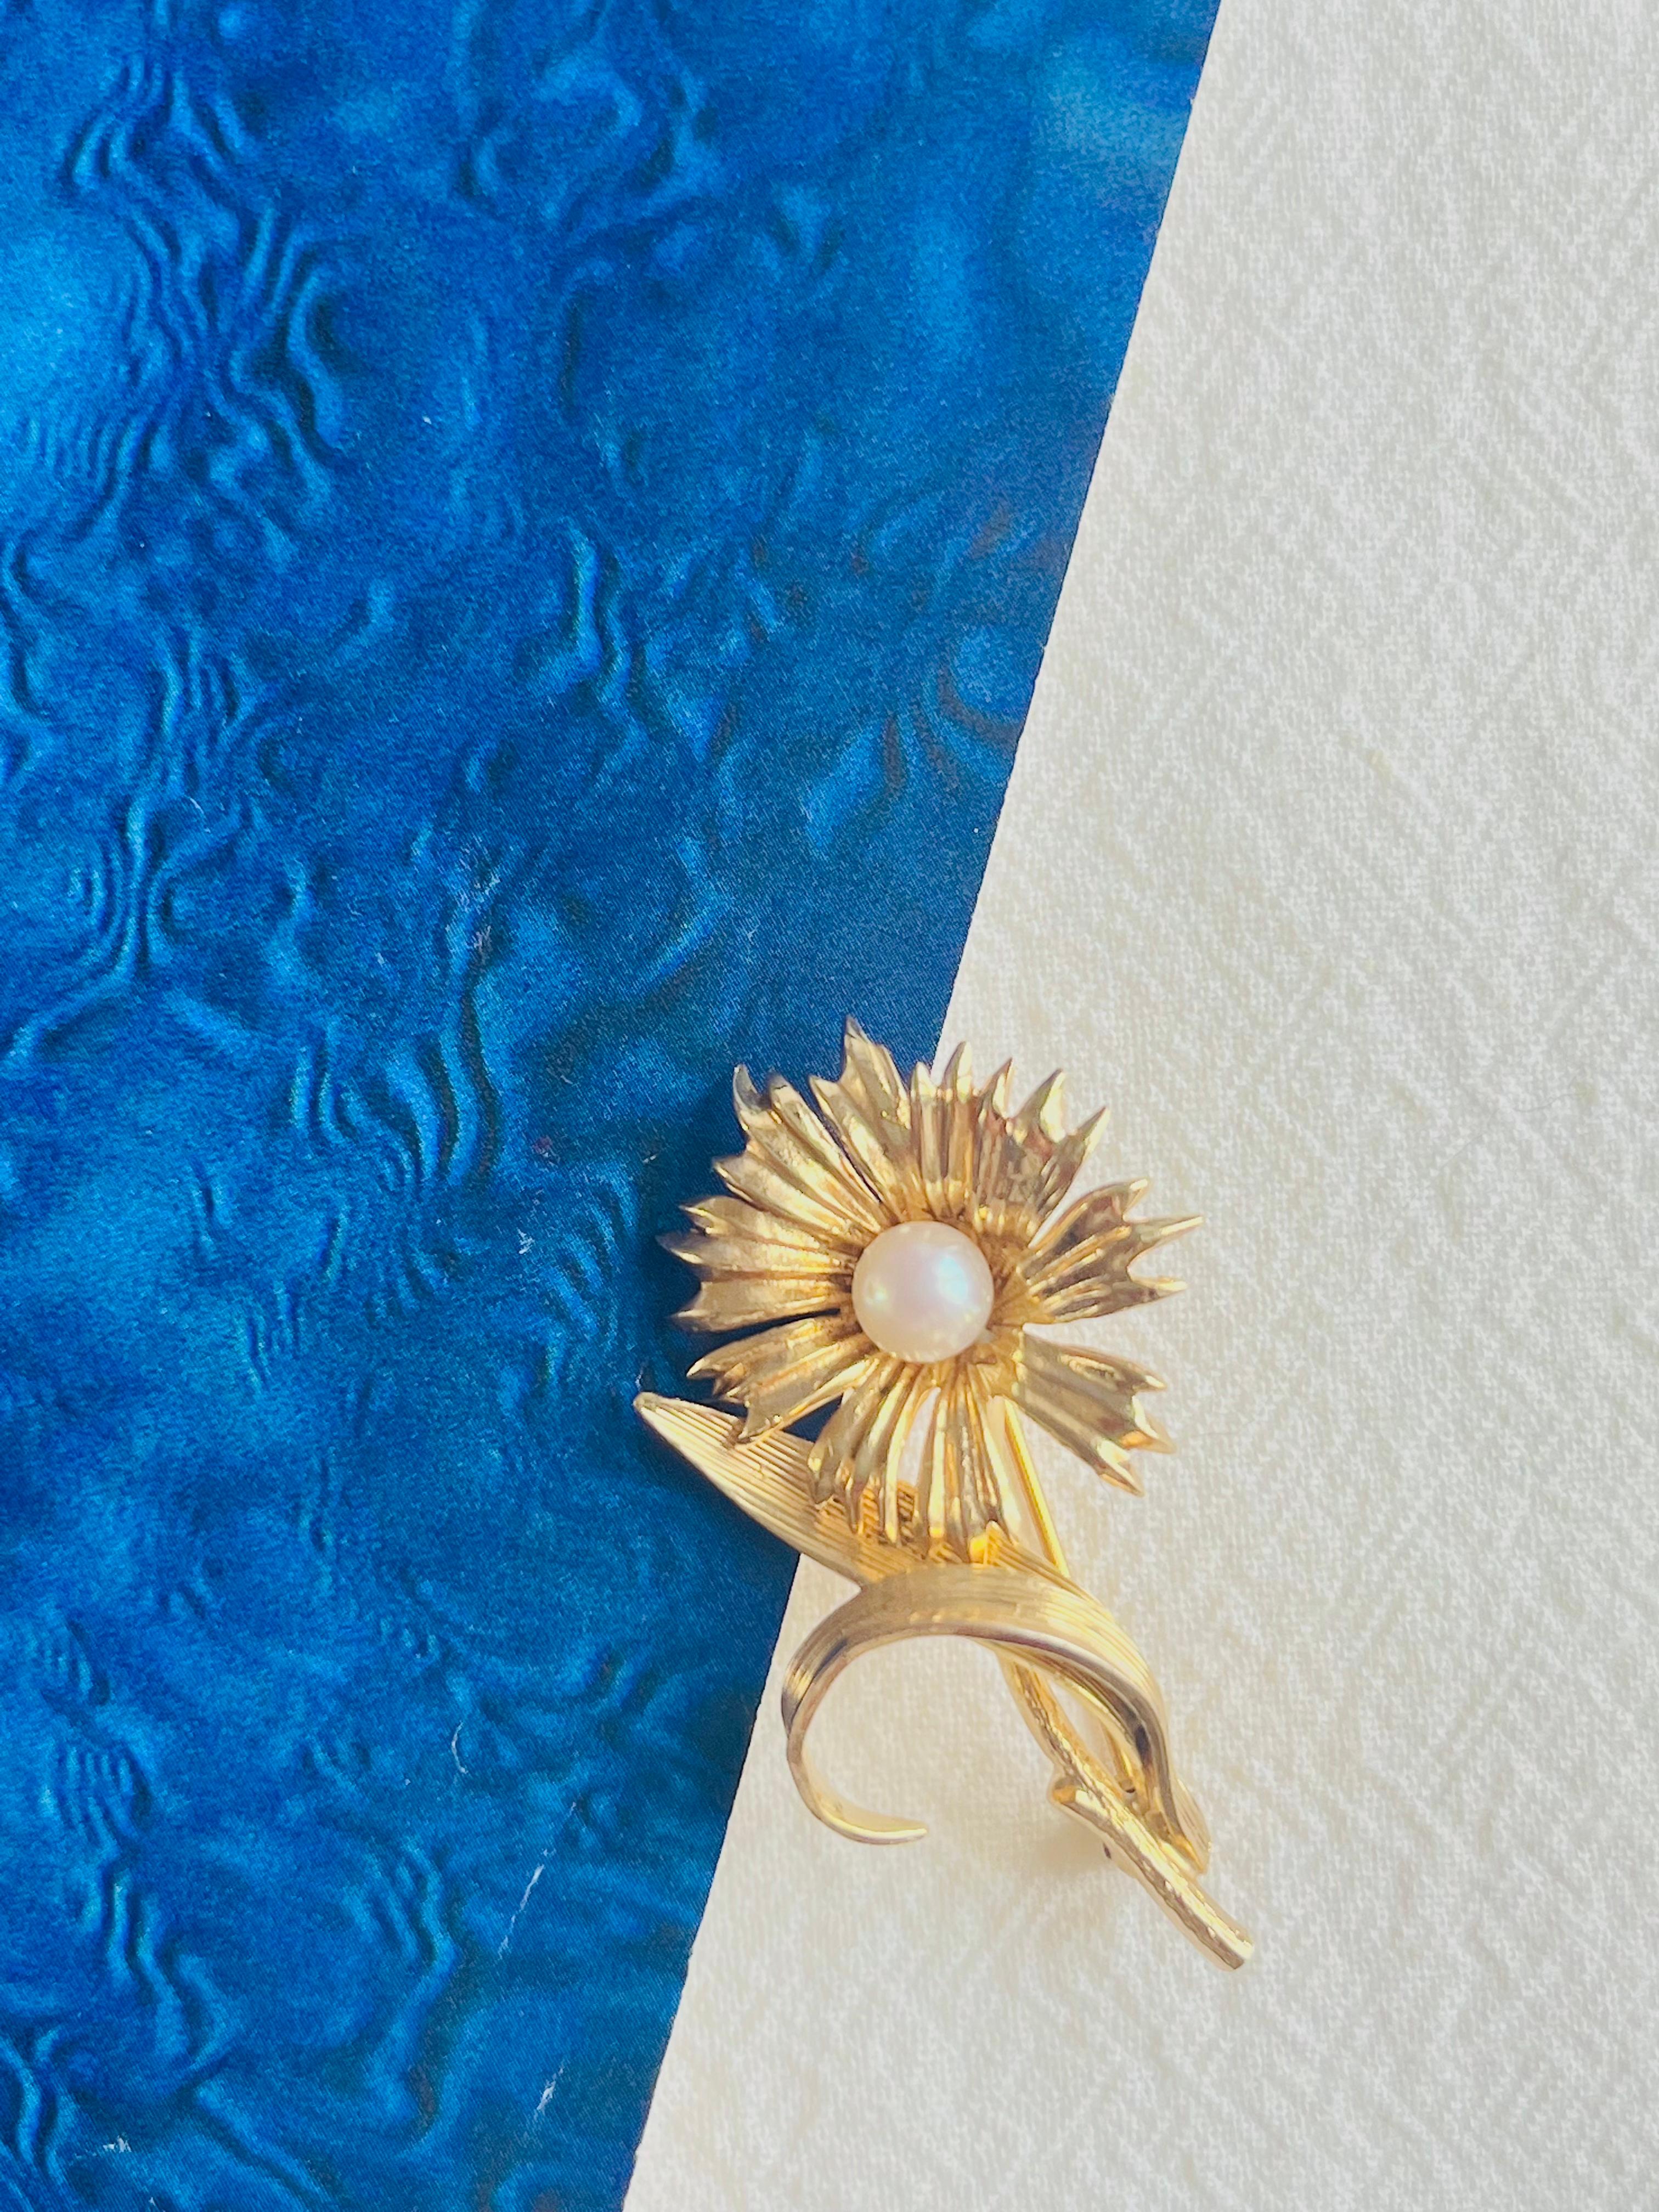 Christian Dior GROSSE 1965 Vintage Daisy Swirl Leaf Pearl Flower Gold Brooch In Good Condition For Sale In Wokingham, England